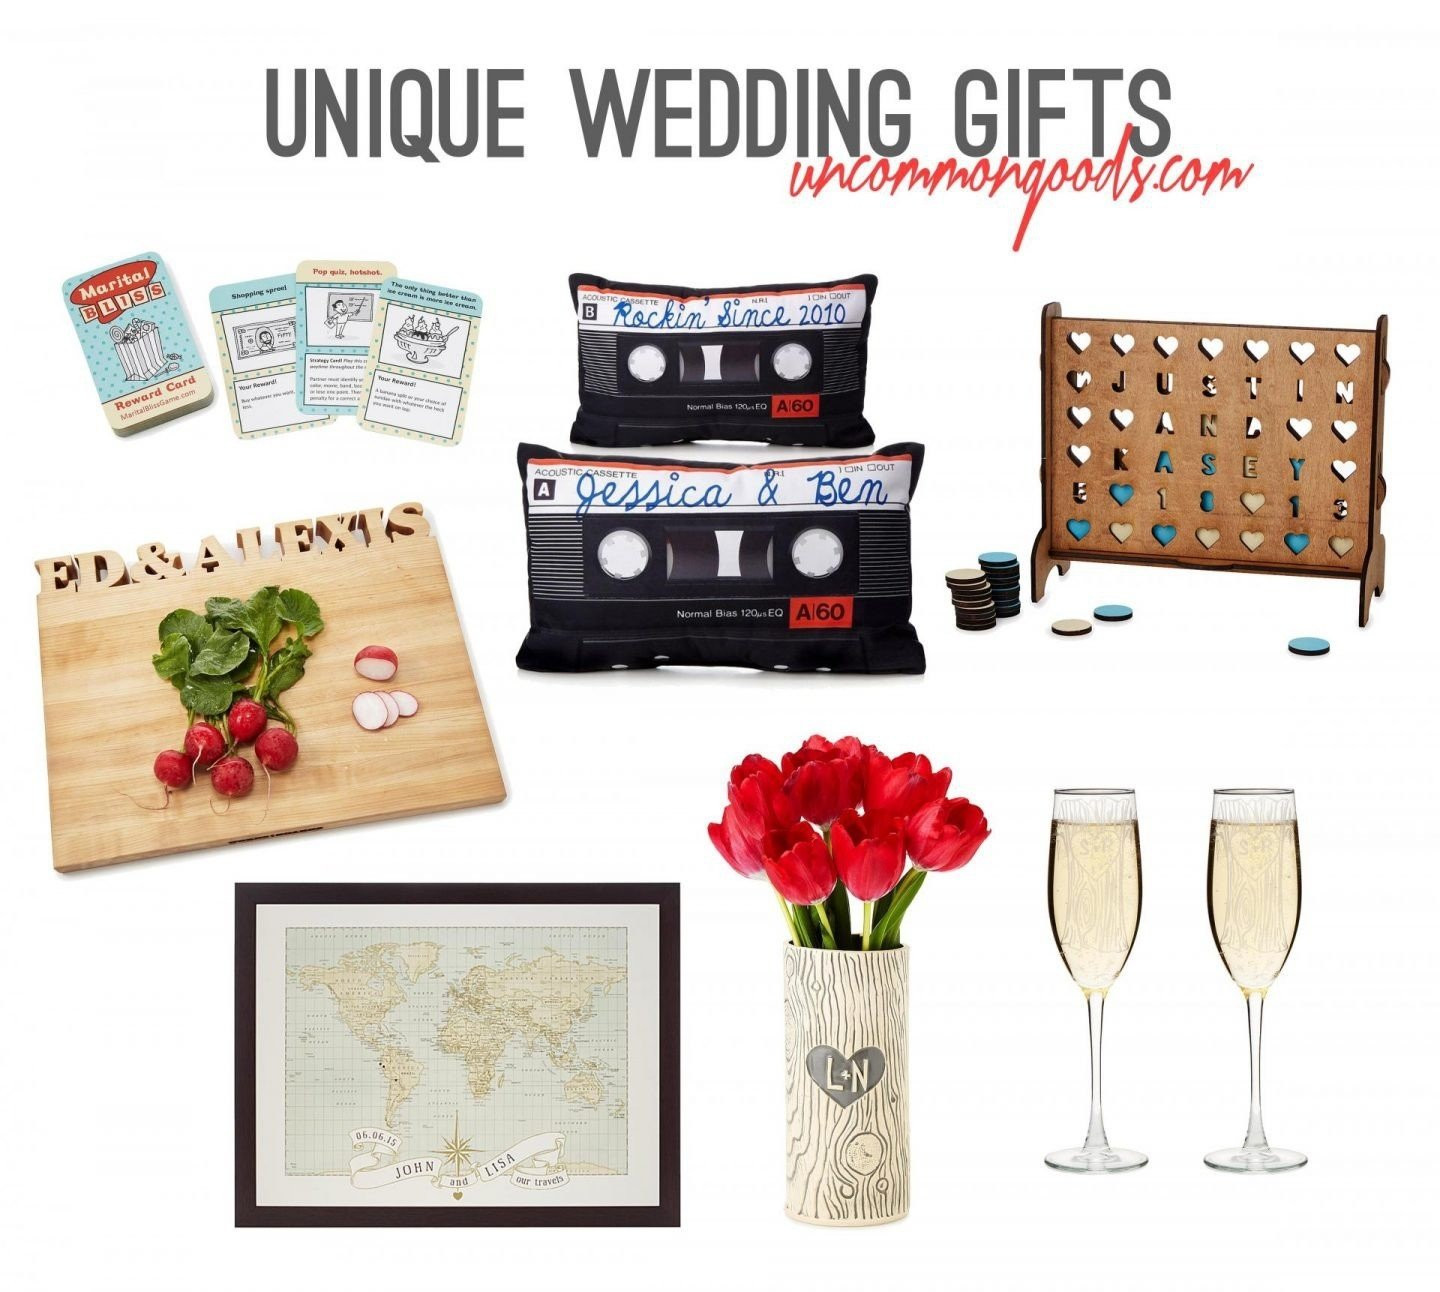 Gift Ideas For Older Couples
 10 Fashionable Wedding Gift Ideas For Second Marriages 2019